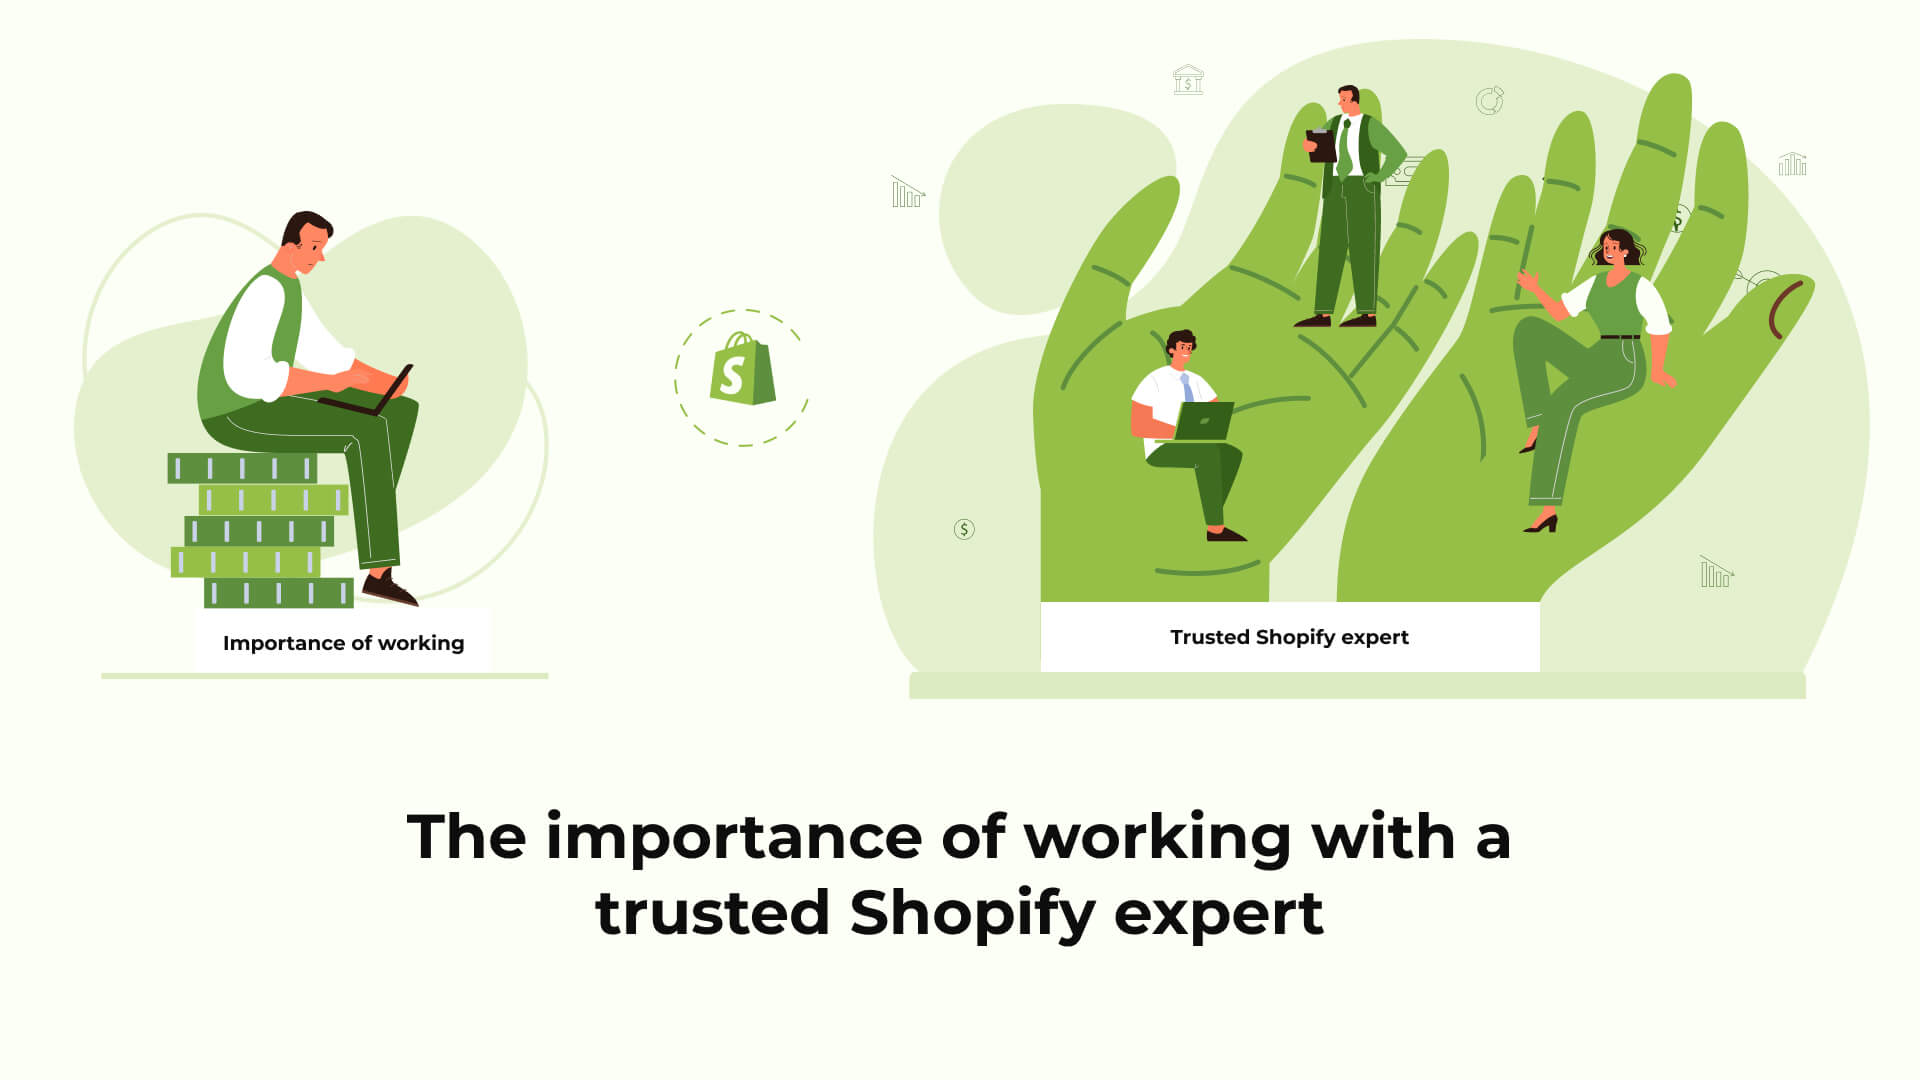 The importance of working with a trusted Shopify expert